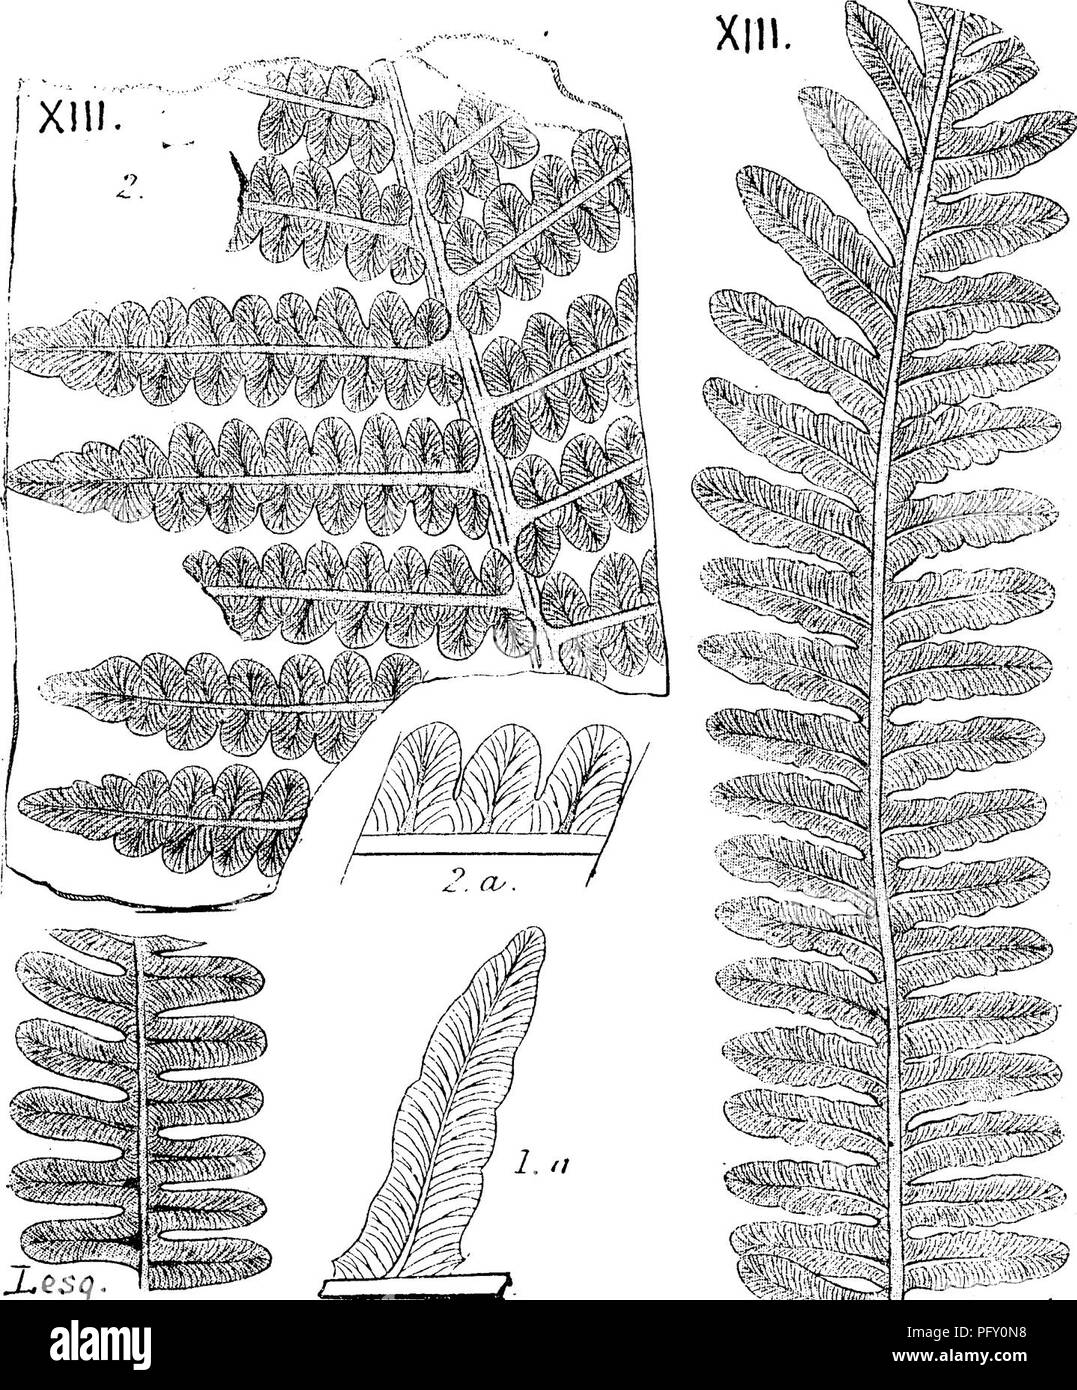 . A dictionary of the fossils of Pennsylvania and neighboring states named in the reports and catalogues of the survey ... Paleontology. 13 Alet. Alethopteris pennsylvanica. Lesquereux, Coal Flora, p. • XIII.. PI 11 181; Bost. Jour. S. N. H. Vol. 6,p. 423 ; Geol. Pa. 1858, p. 864, pi. XI, figs. 1,2; Geol. Rt. 111. IV.; Schimper, I., 562. Has the general look of A, lielencB ; and Schimper compares it with A. grandmi of Brogniart. Lesquereux found it in the Salem anthracite bed at Pottsville, Pa.; in M. Lacoe's collection at Pittston, Pa , labeled Maitby. Pa.; and one poor fragment from the Morr Stock Photo